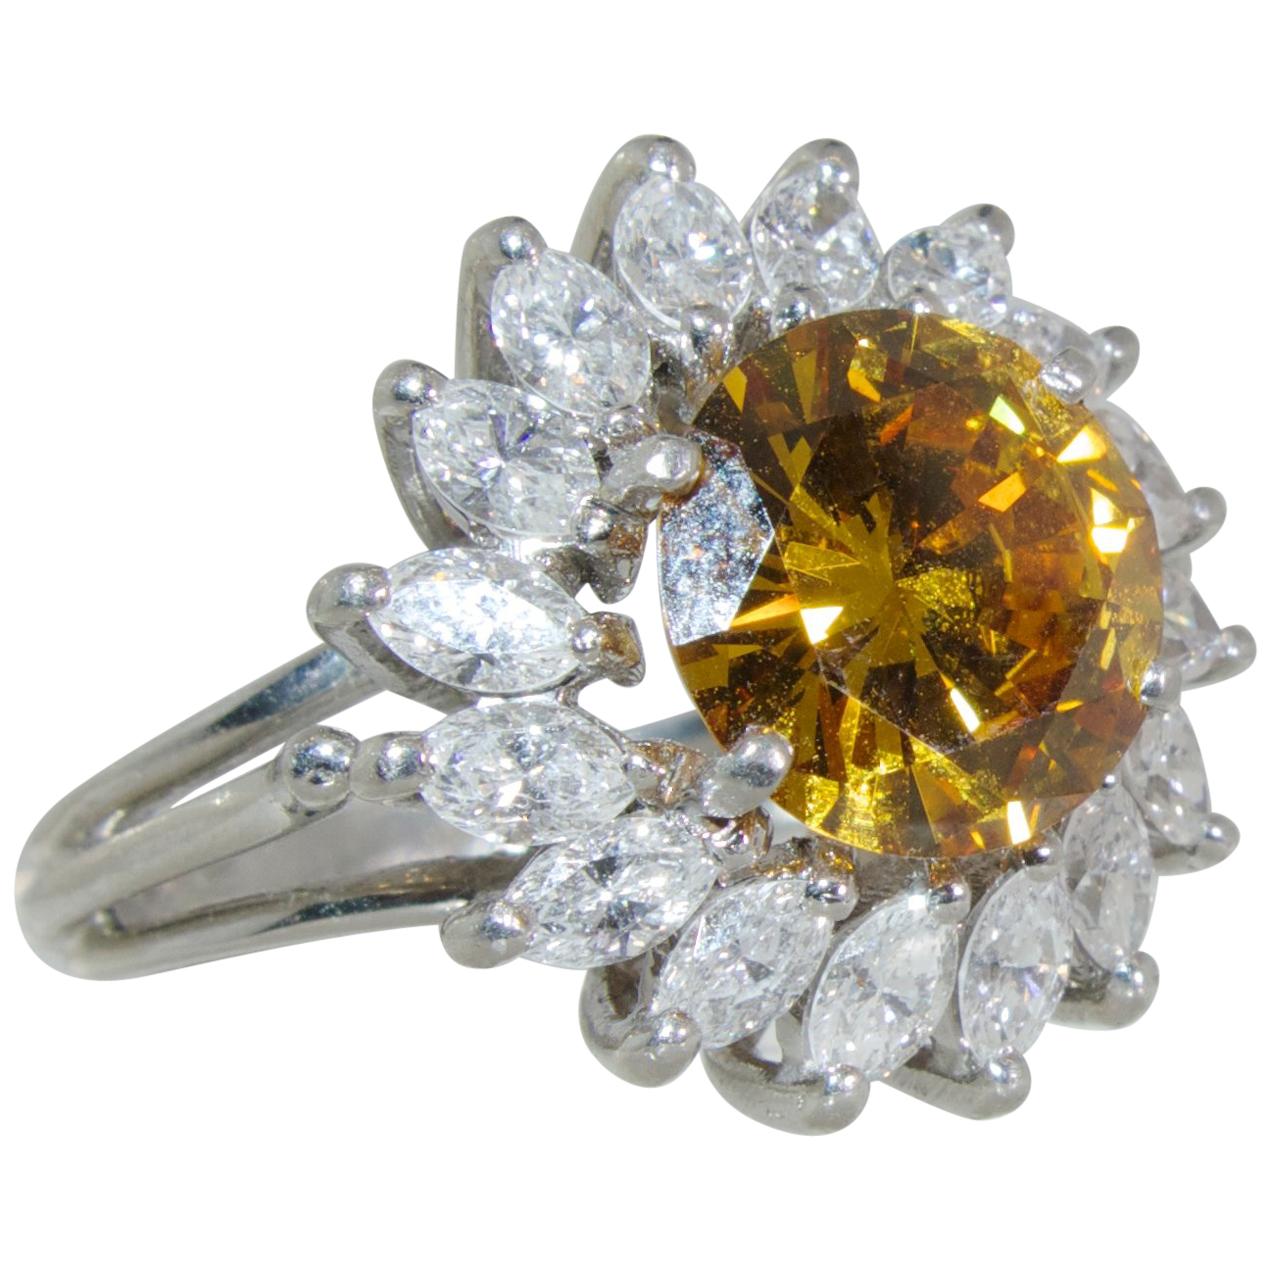  Fancy color Diamond, 2.68 cts  surrounded by White Diamond in a Platinum Ring